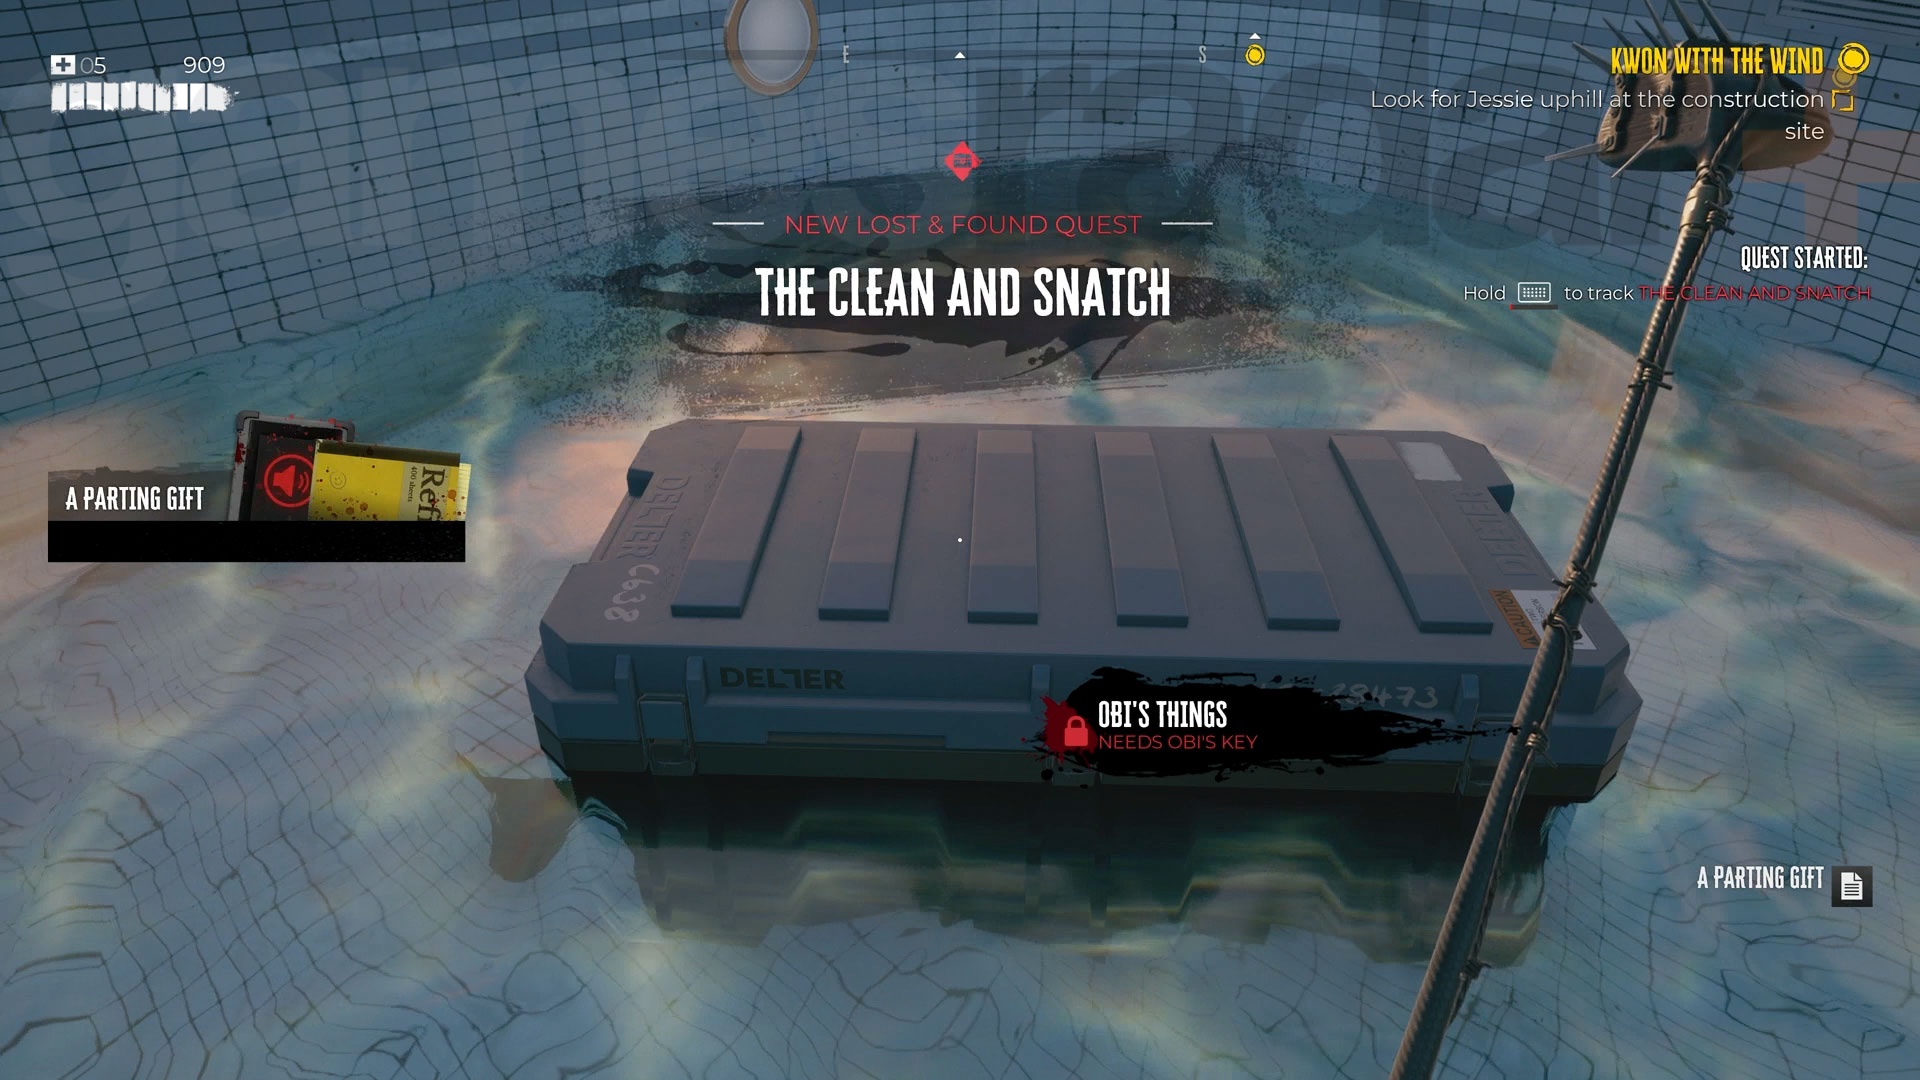 How do you open the Mystery Goodie Box in Dead Island 2